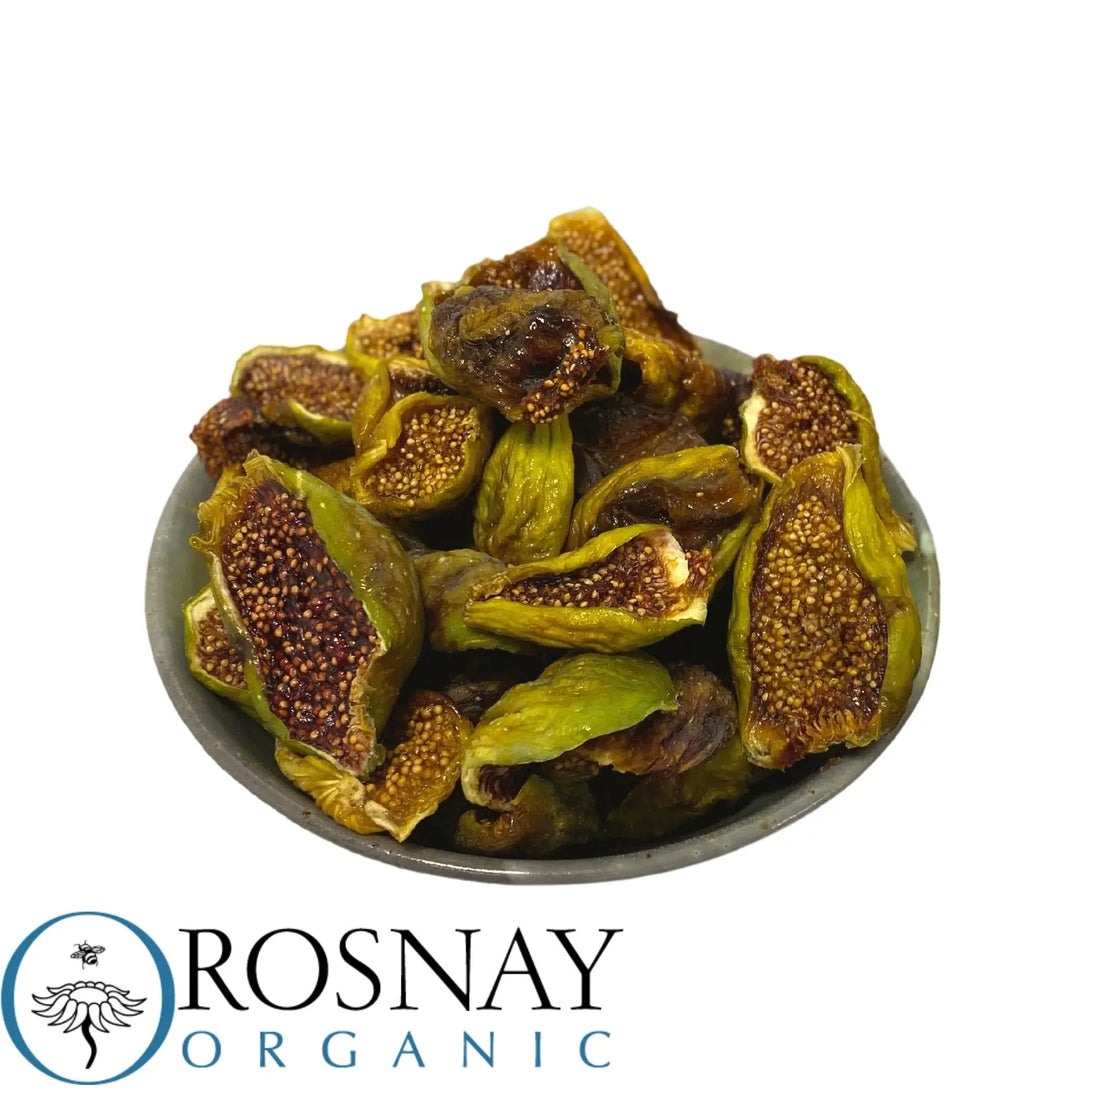 Figs Dried Organic 200g-Grocery-Rosnay Organic-Sovereign Foods-Australian Grown Bulk Foods